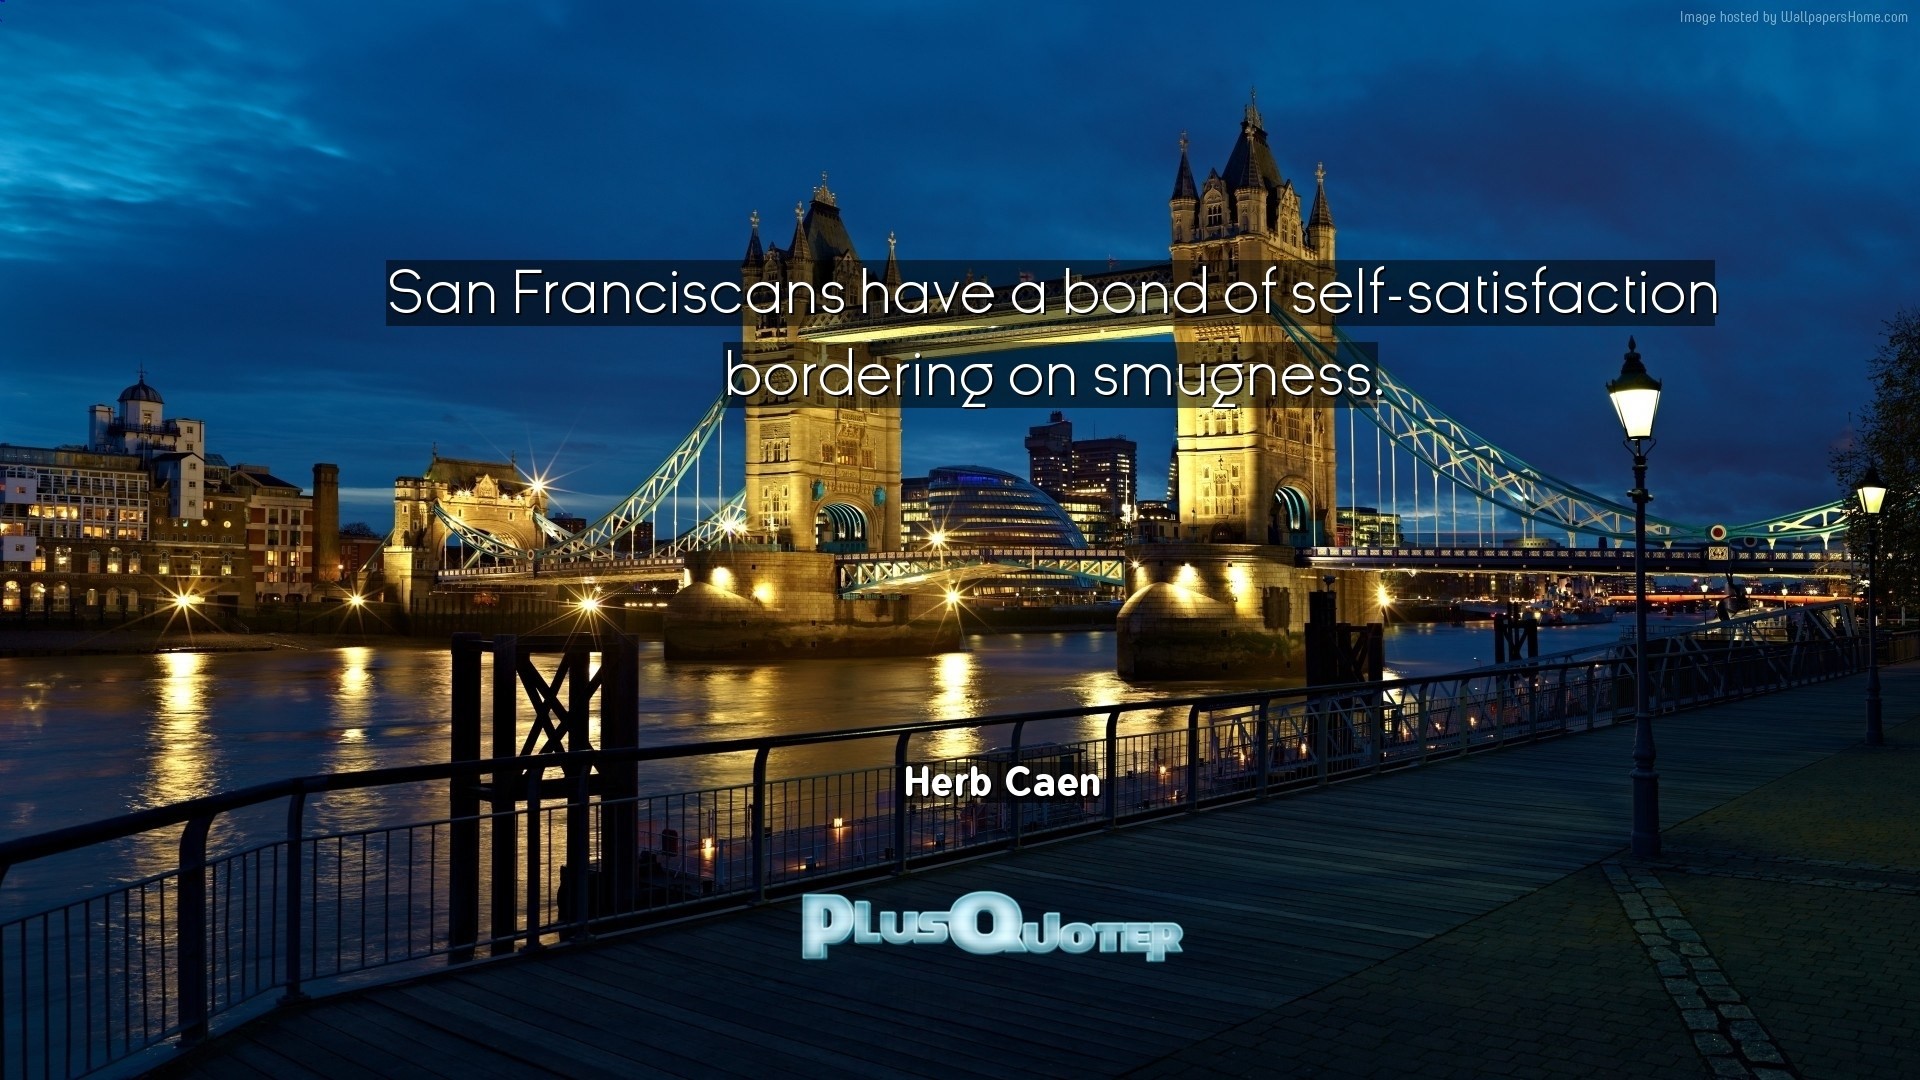 1920x1080 Download Wallpaper with inspirational Quotes- "San Franciscans have a bond  of self-satisfaction. “